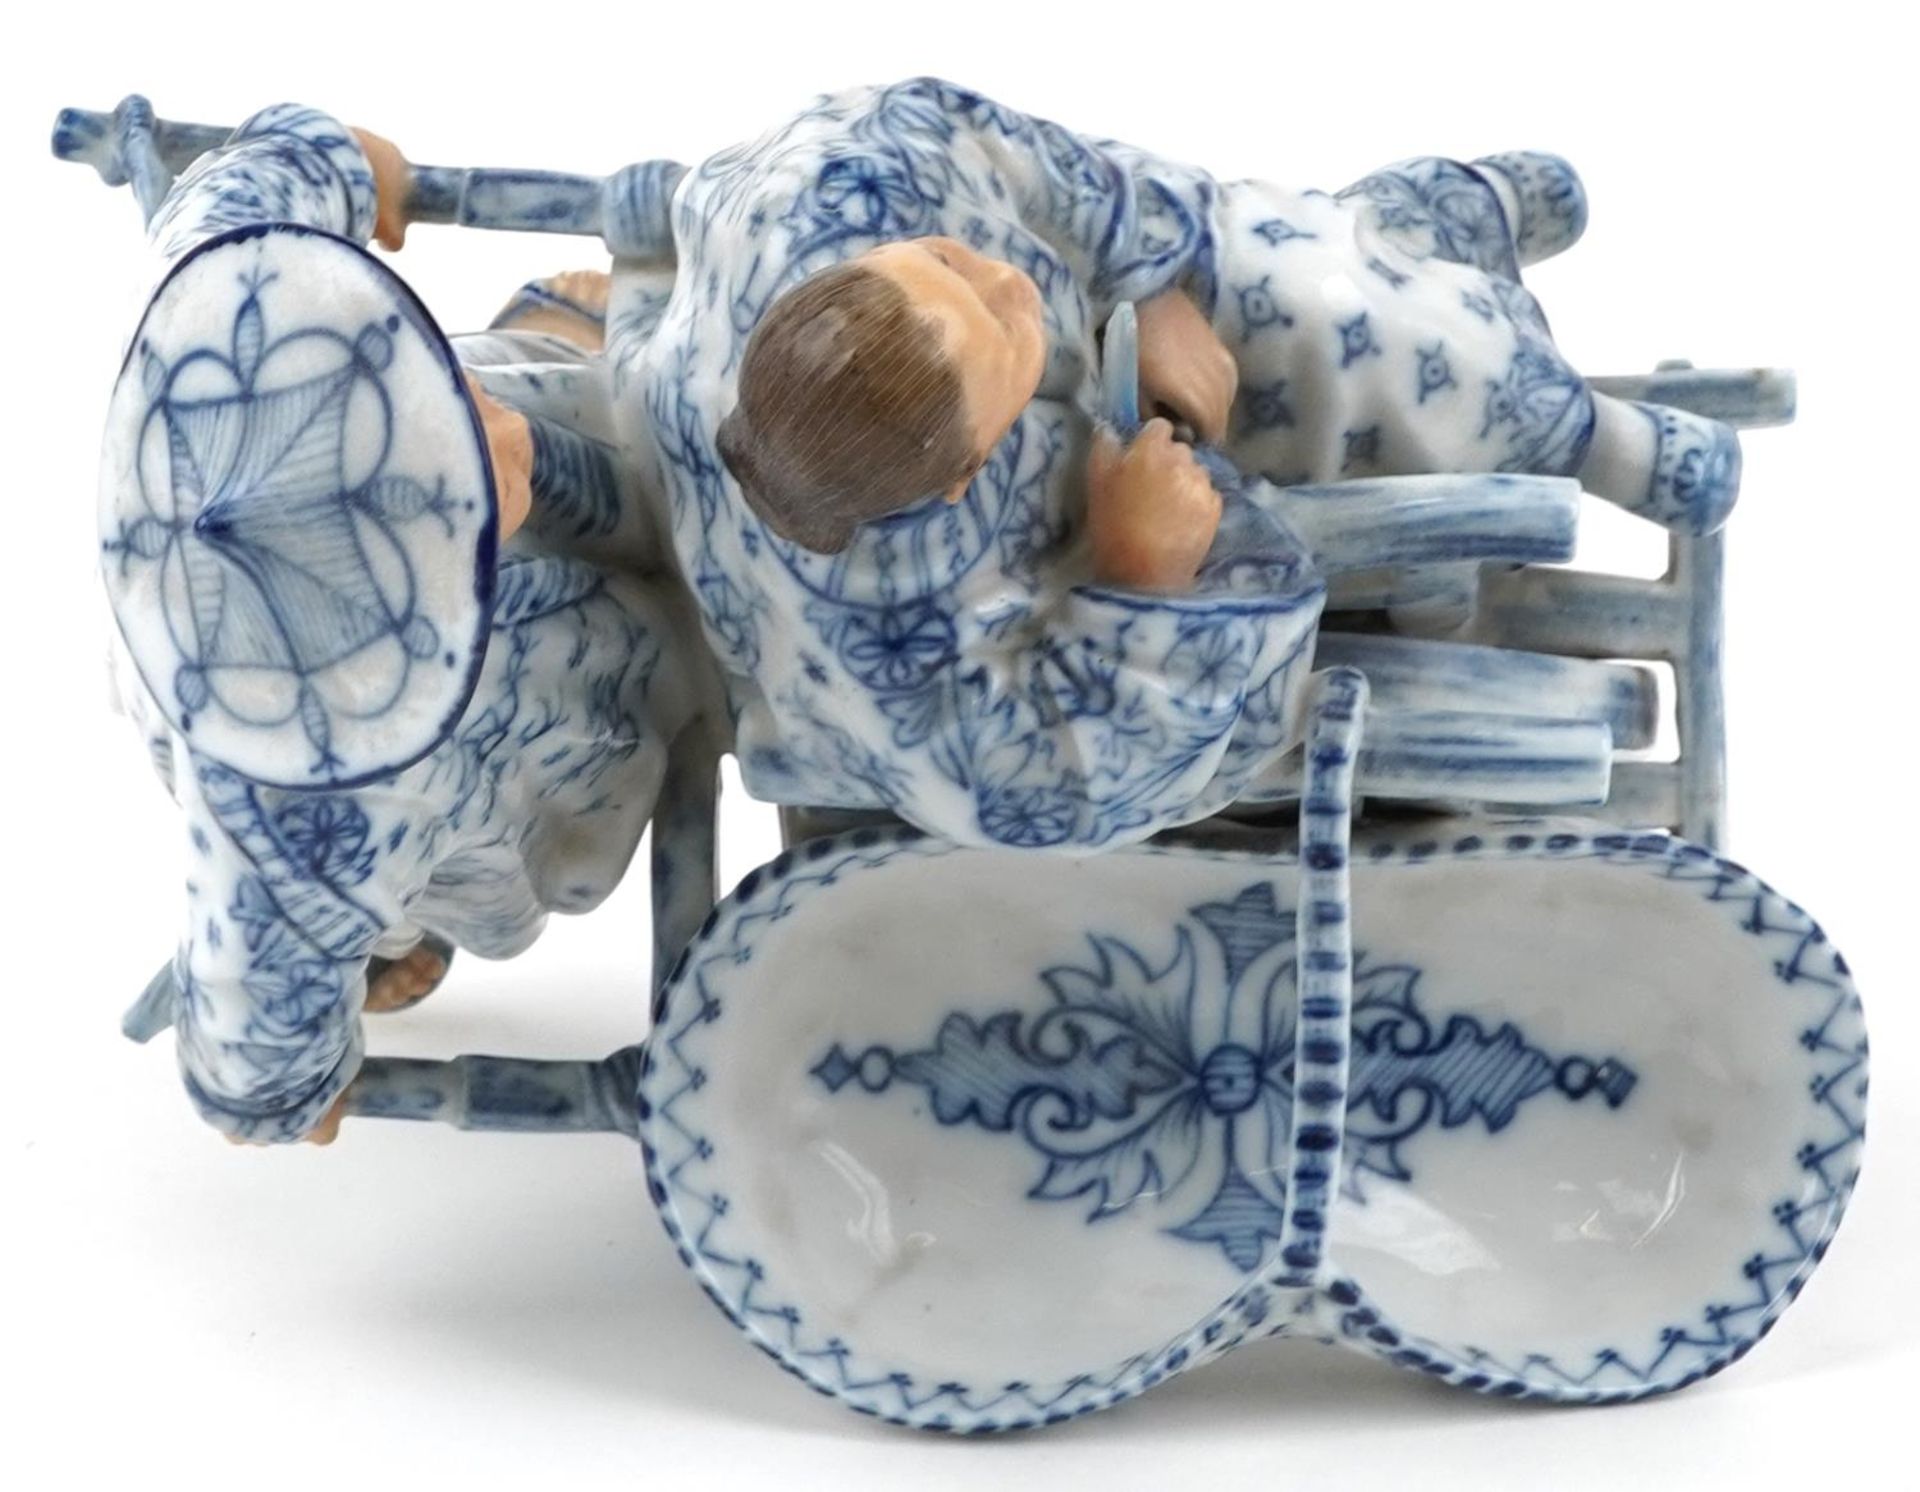 19th century European porcelain sweetmeat dish in the form of a Chinaman with rickshaw - Image 6 of 7